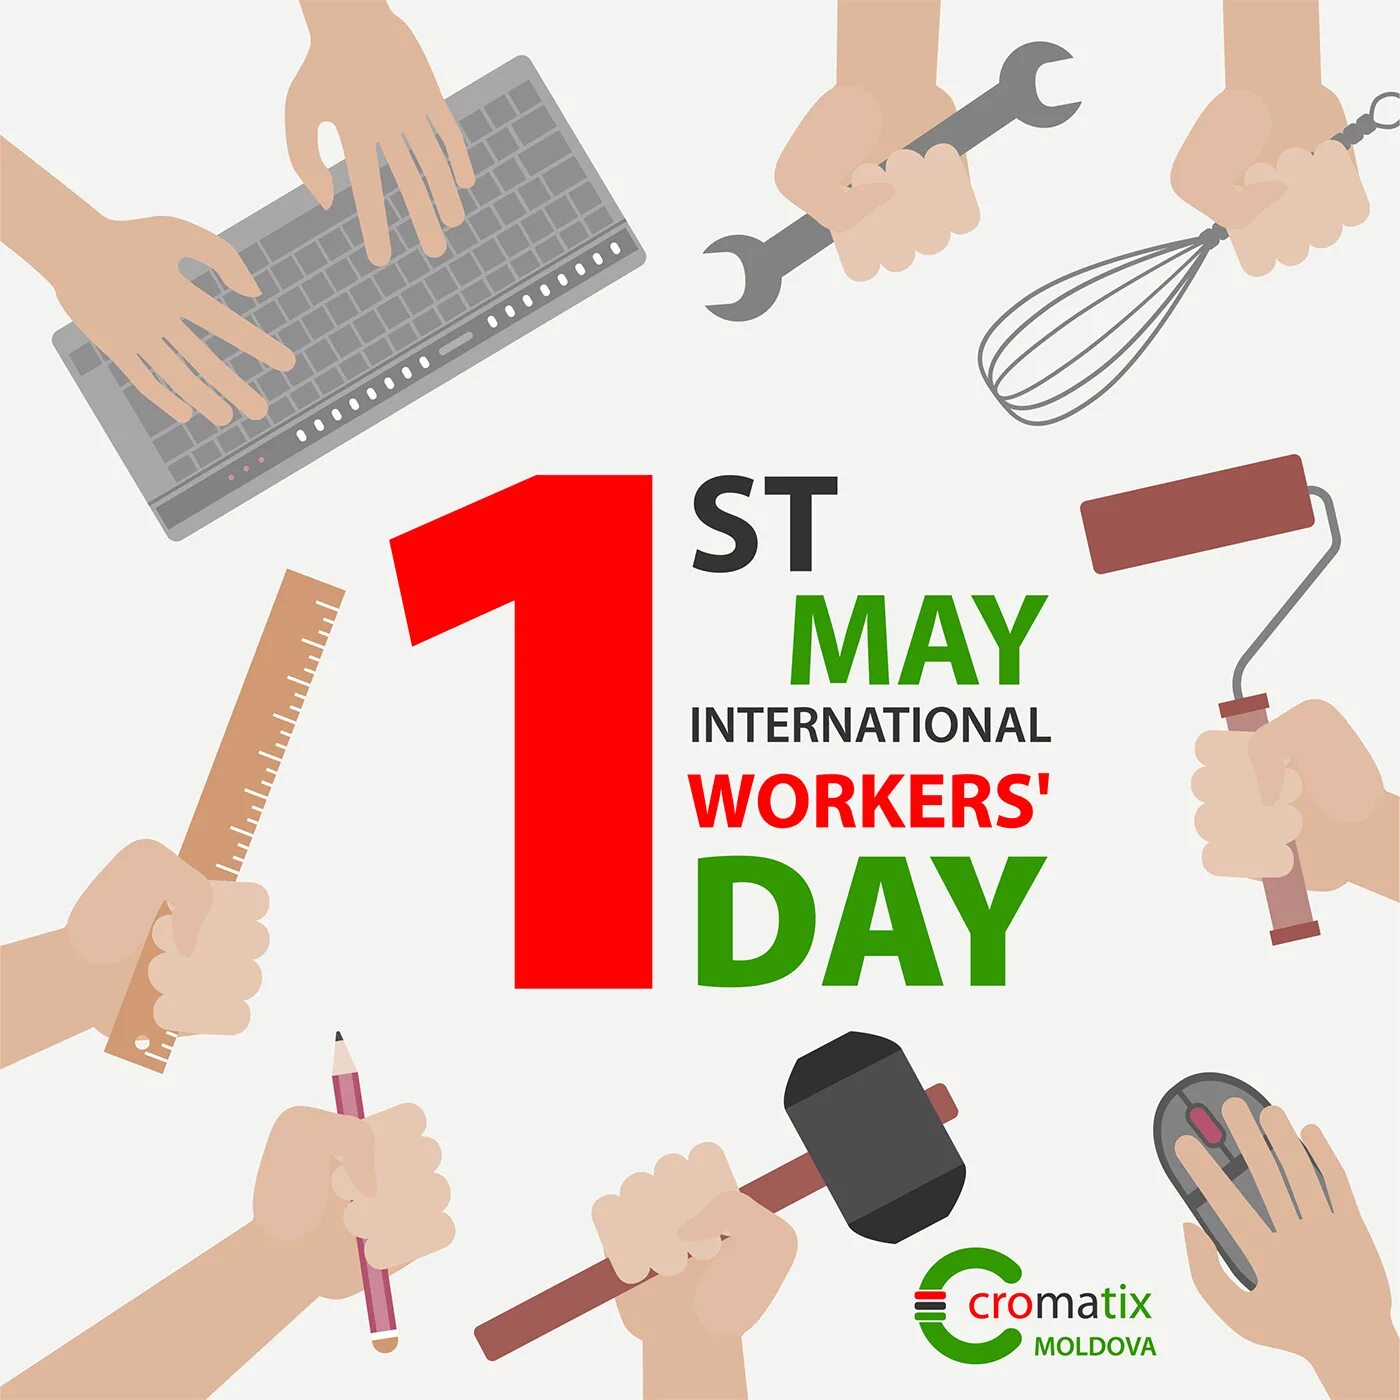 1 May International workers' Day. 1st May Labour Day. 1 May Labour Day. International workers Day 1 мая. May working days